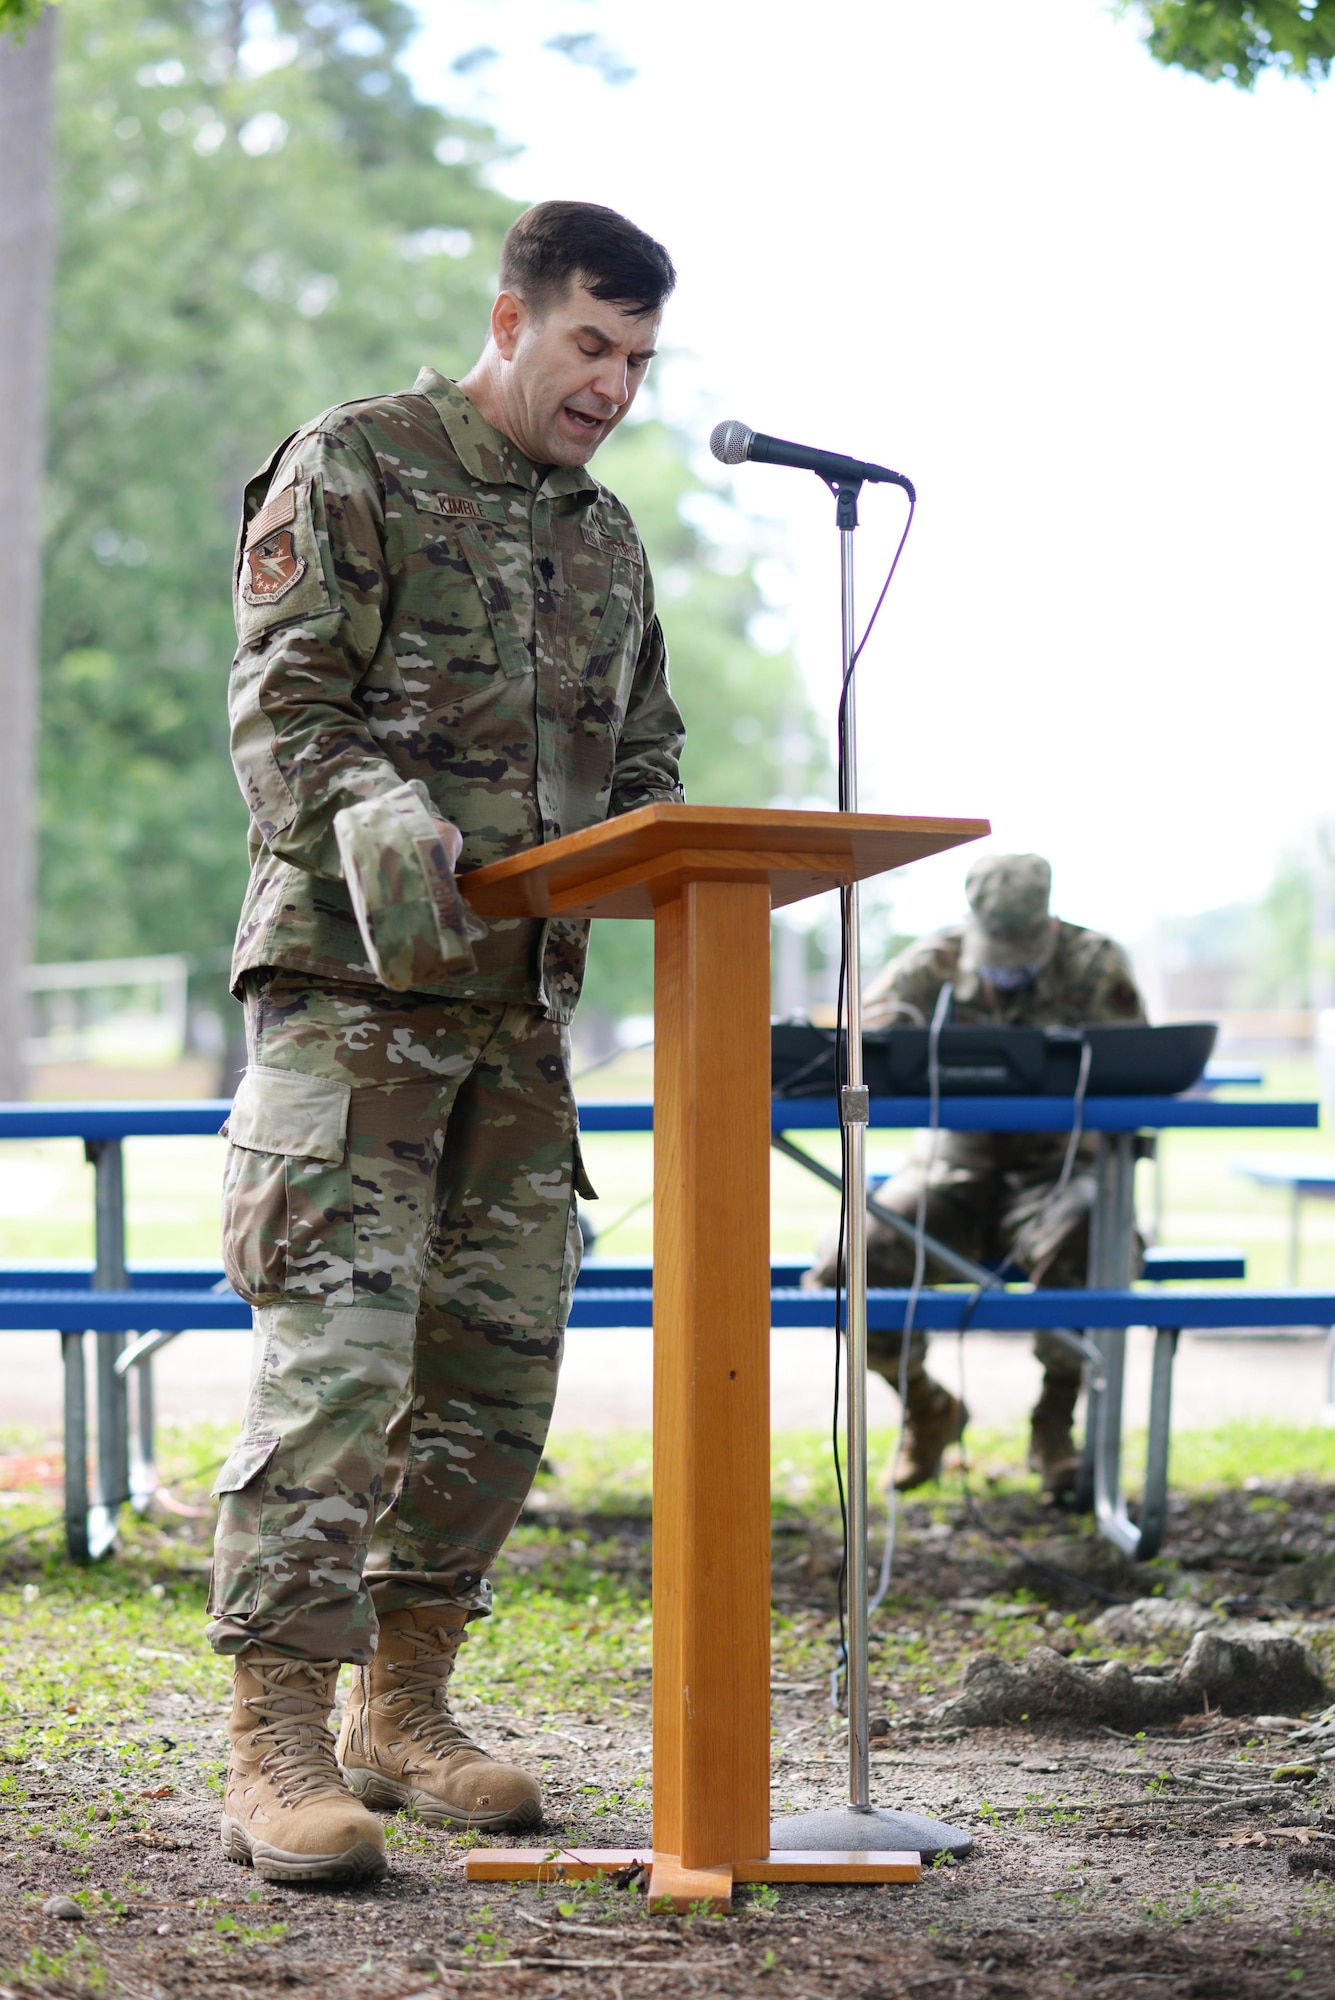 Chaplain (Lt. Col.) Bradley Kimble, 14th Flying Training Wing Chaplain, says a prayer for the nation June 10, 2020, at Freedom Park on Columbus Air Force Base, Miss. The diverse speakers all had a specific area to pray for but with one purpose - to give hope and awareness that everyone matters. (U.S. Air Force photo by Senior Airman Keith Holcomb)